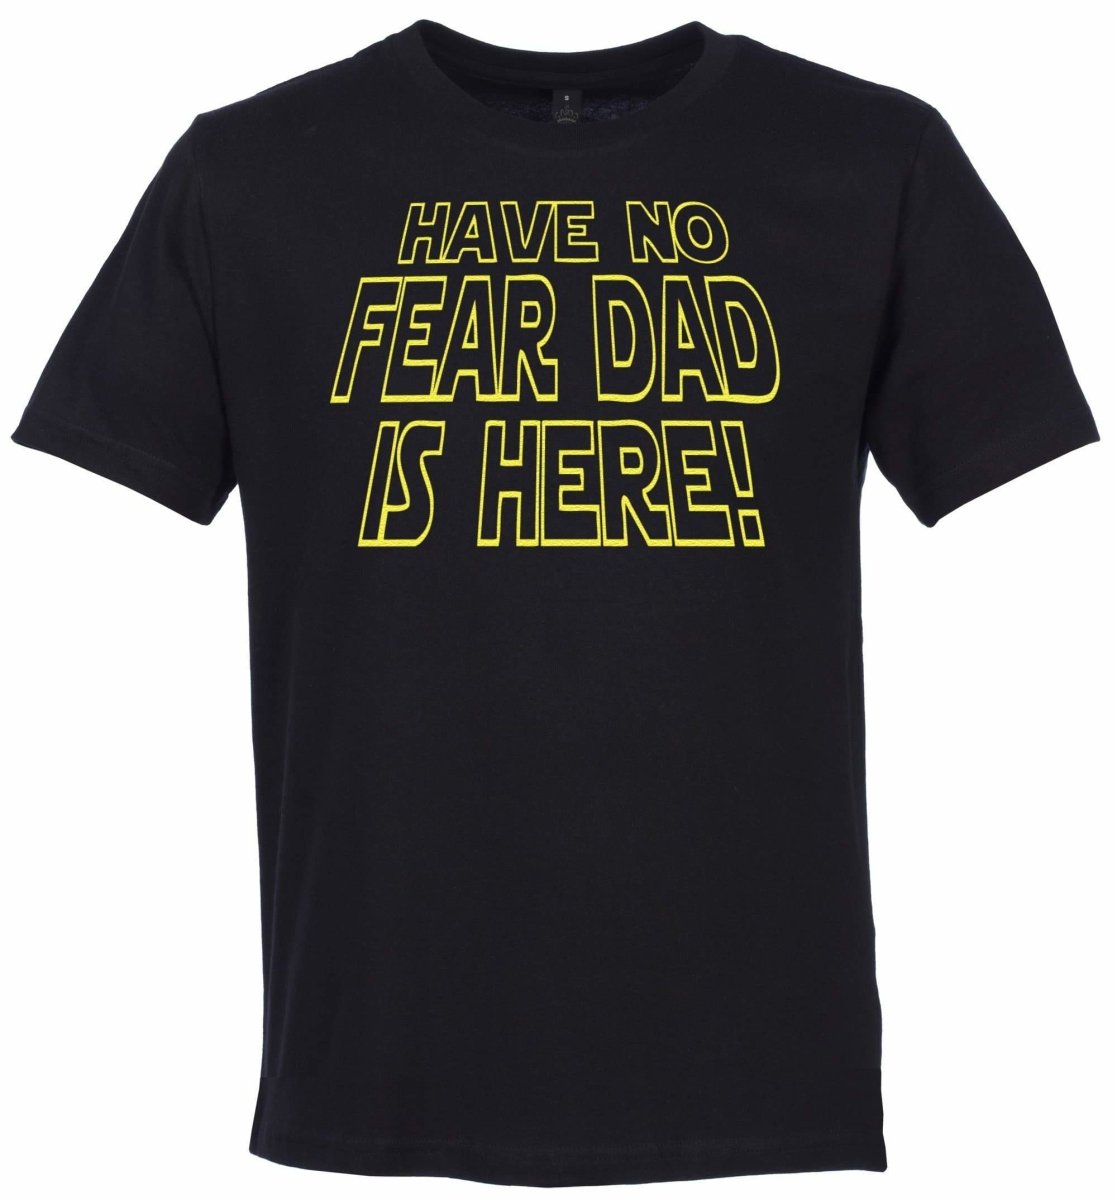 Have No Fear, Dad Is Here - Mens T-Shirt - Dads T-Shirt